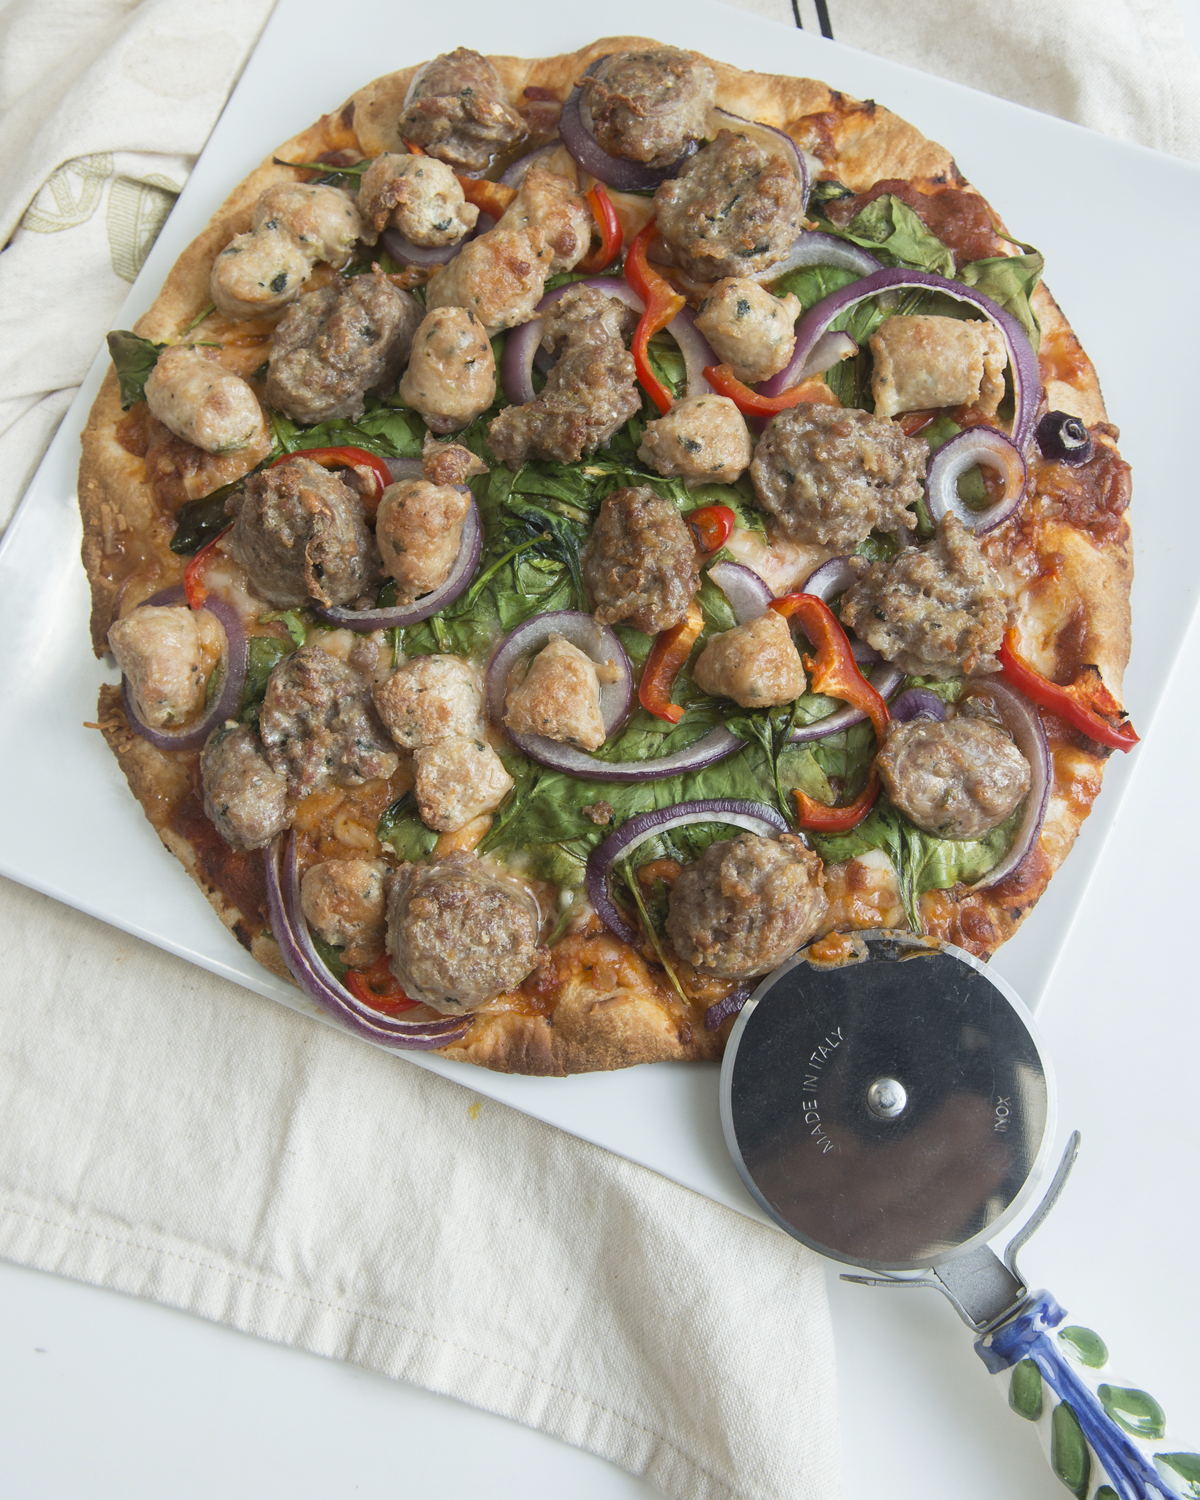 The Best Sausage for Pizza - Hot Italian Sausage